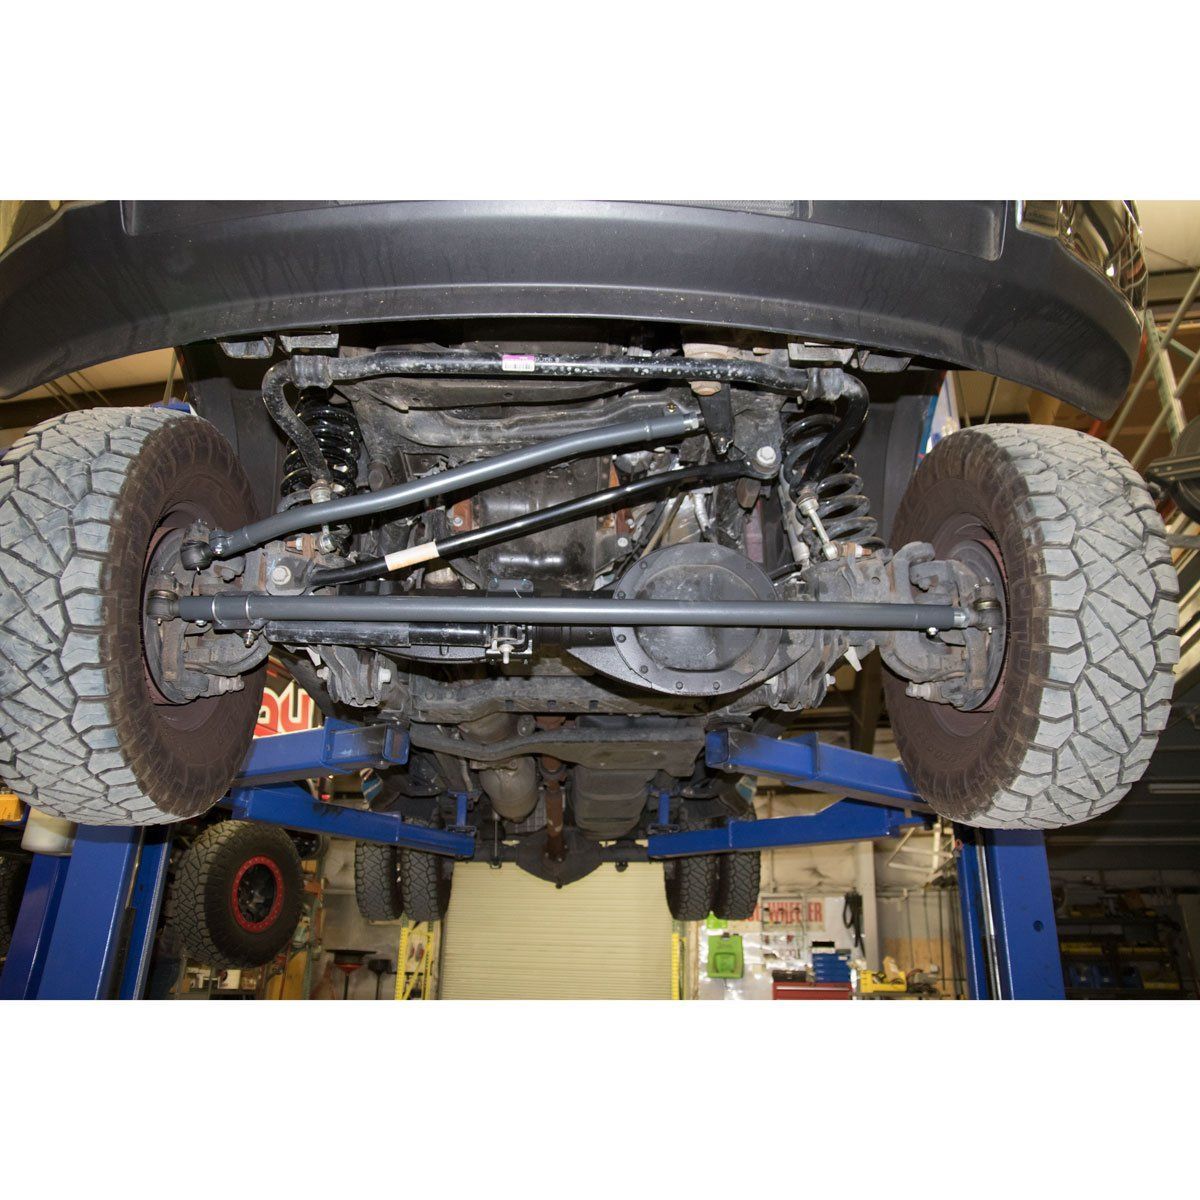 '13-23 Dodge Ram 2500/3500 Heavy Duty Tie Rod Suspension Synergy Manufacturing display